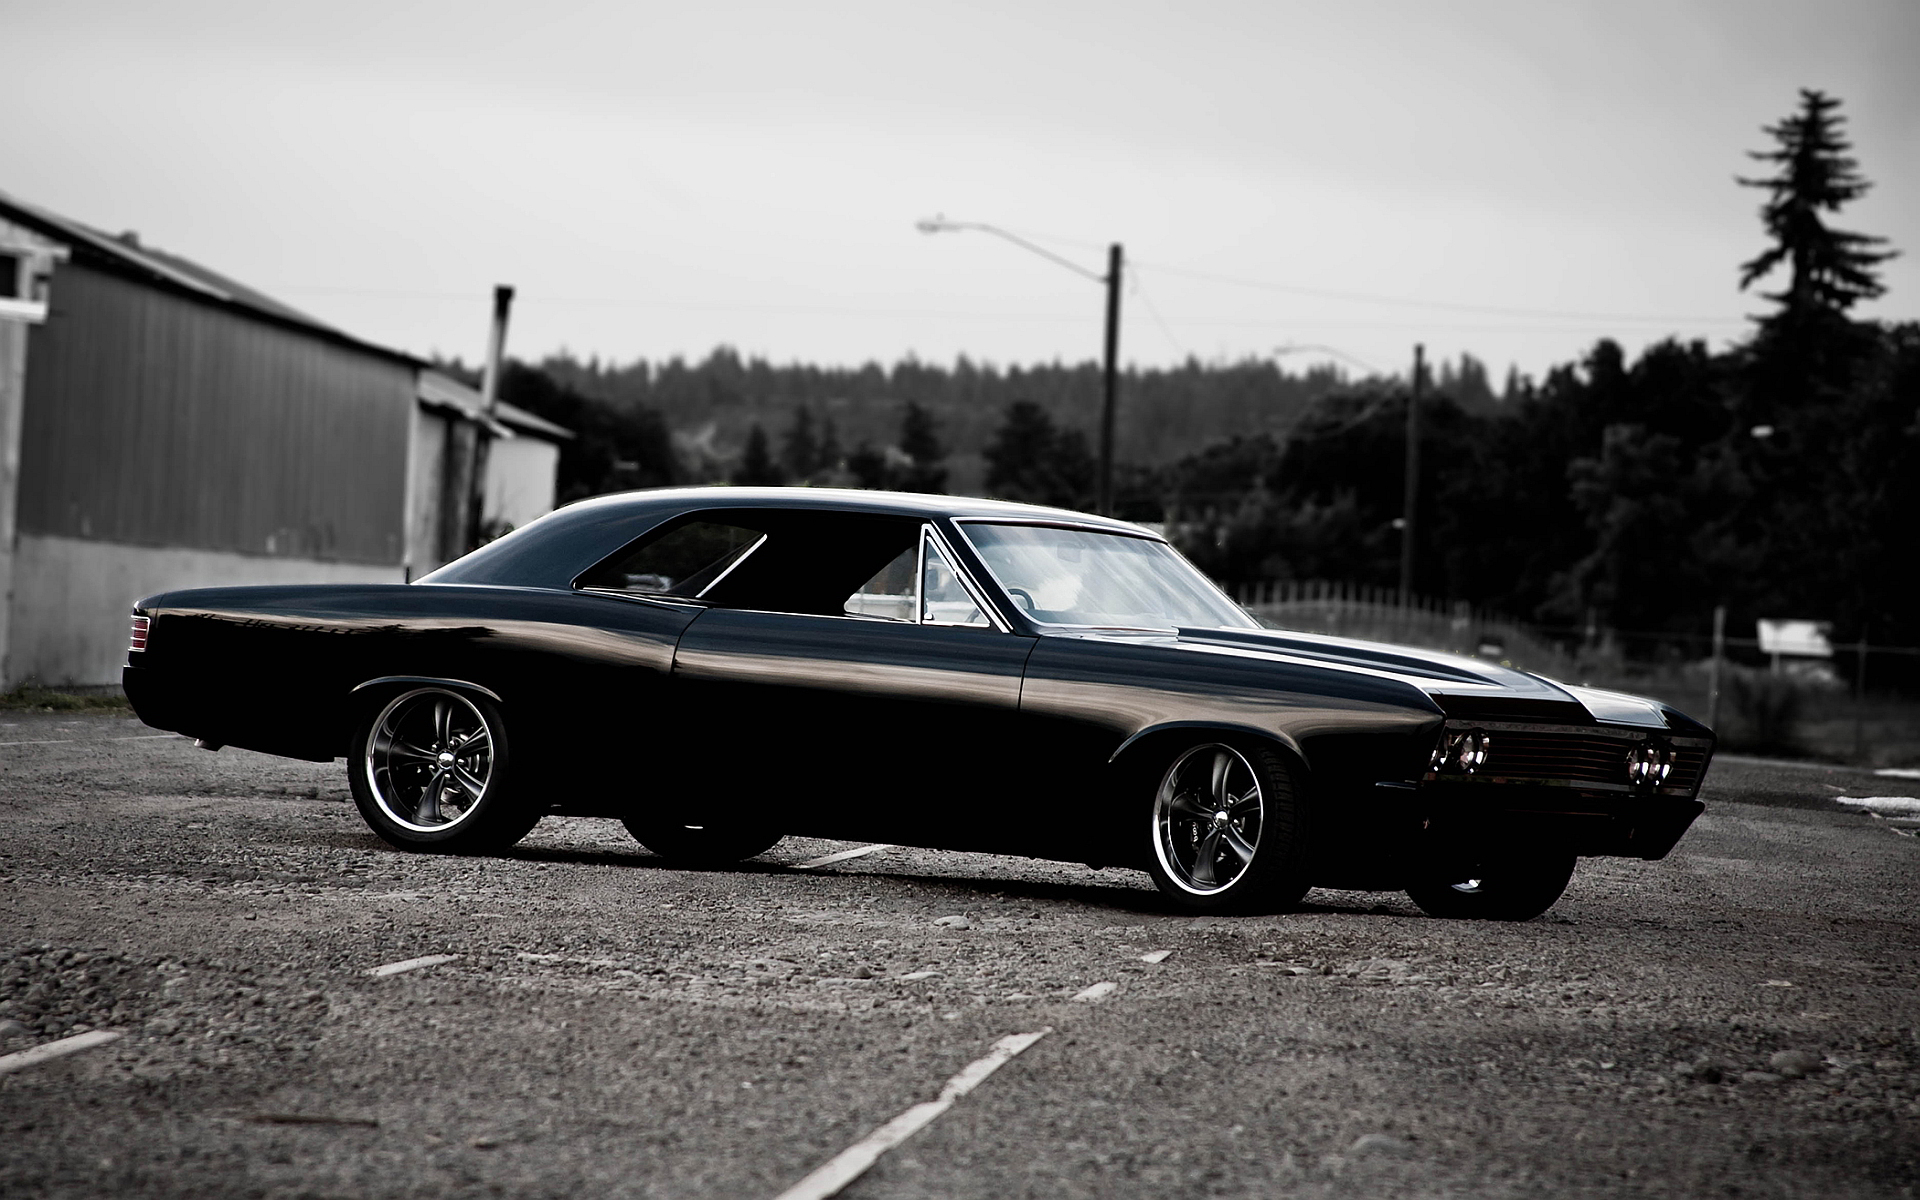 HQ 1967 Chevrolet Chevelle Wallpapers | File 963.21Kb